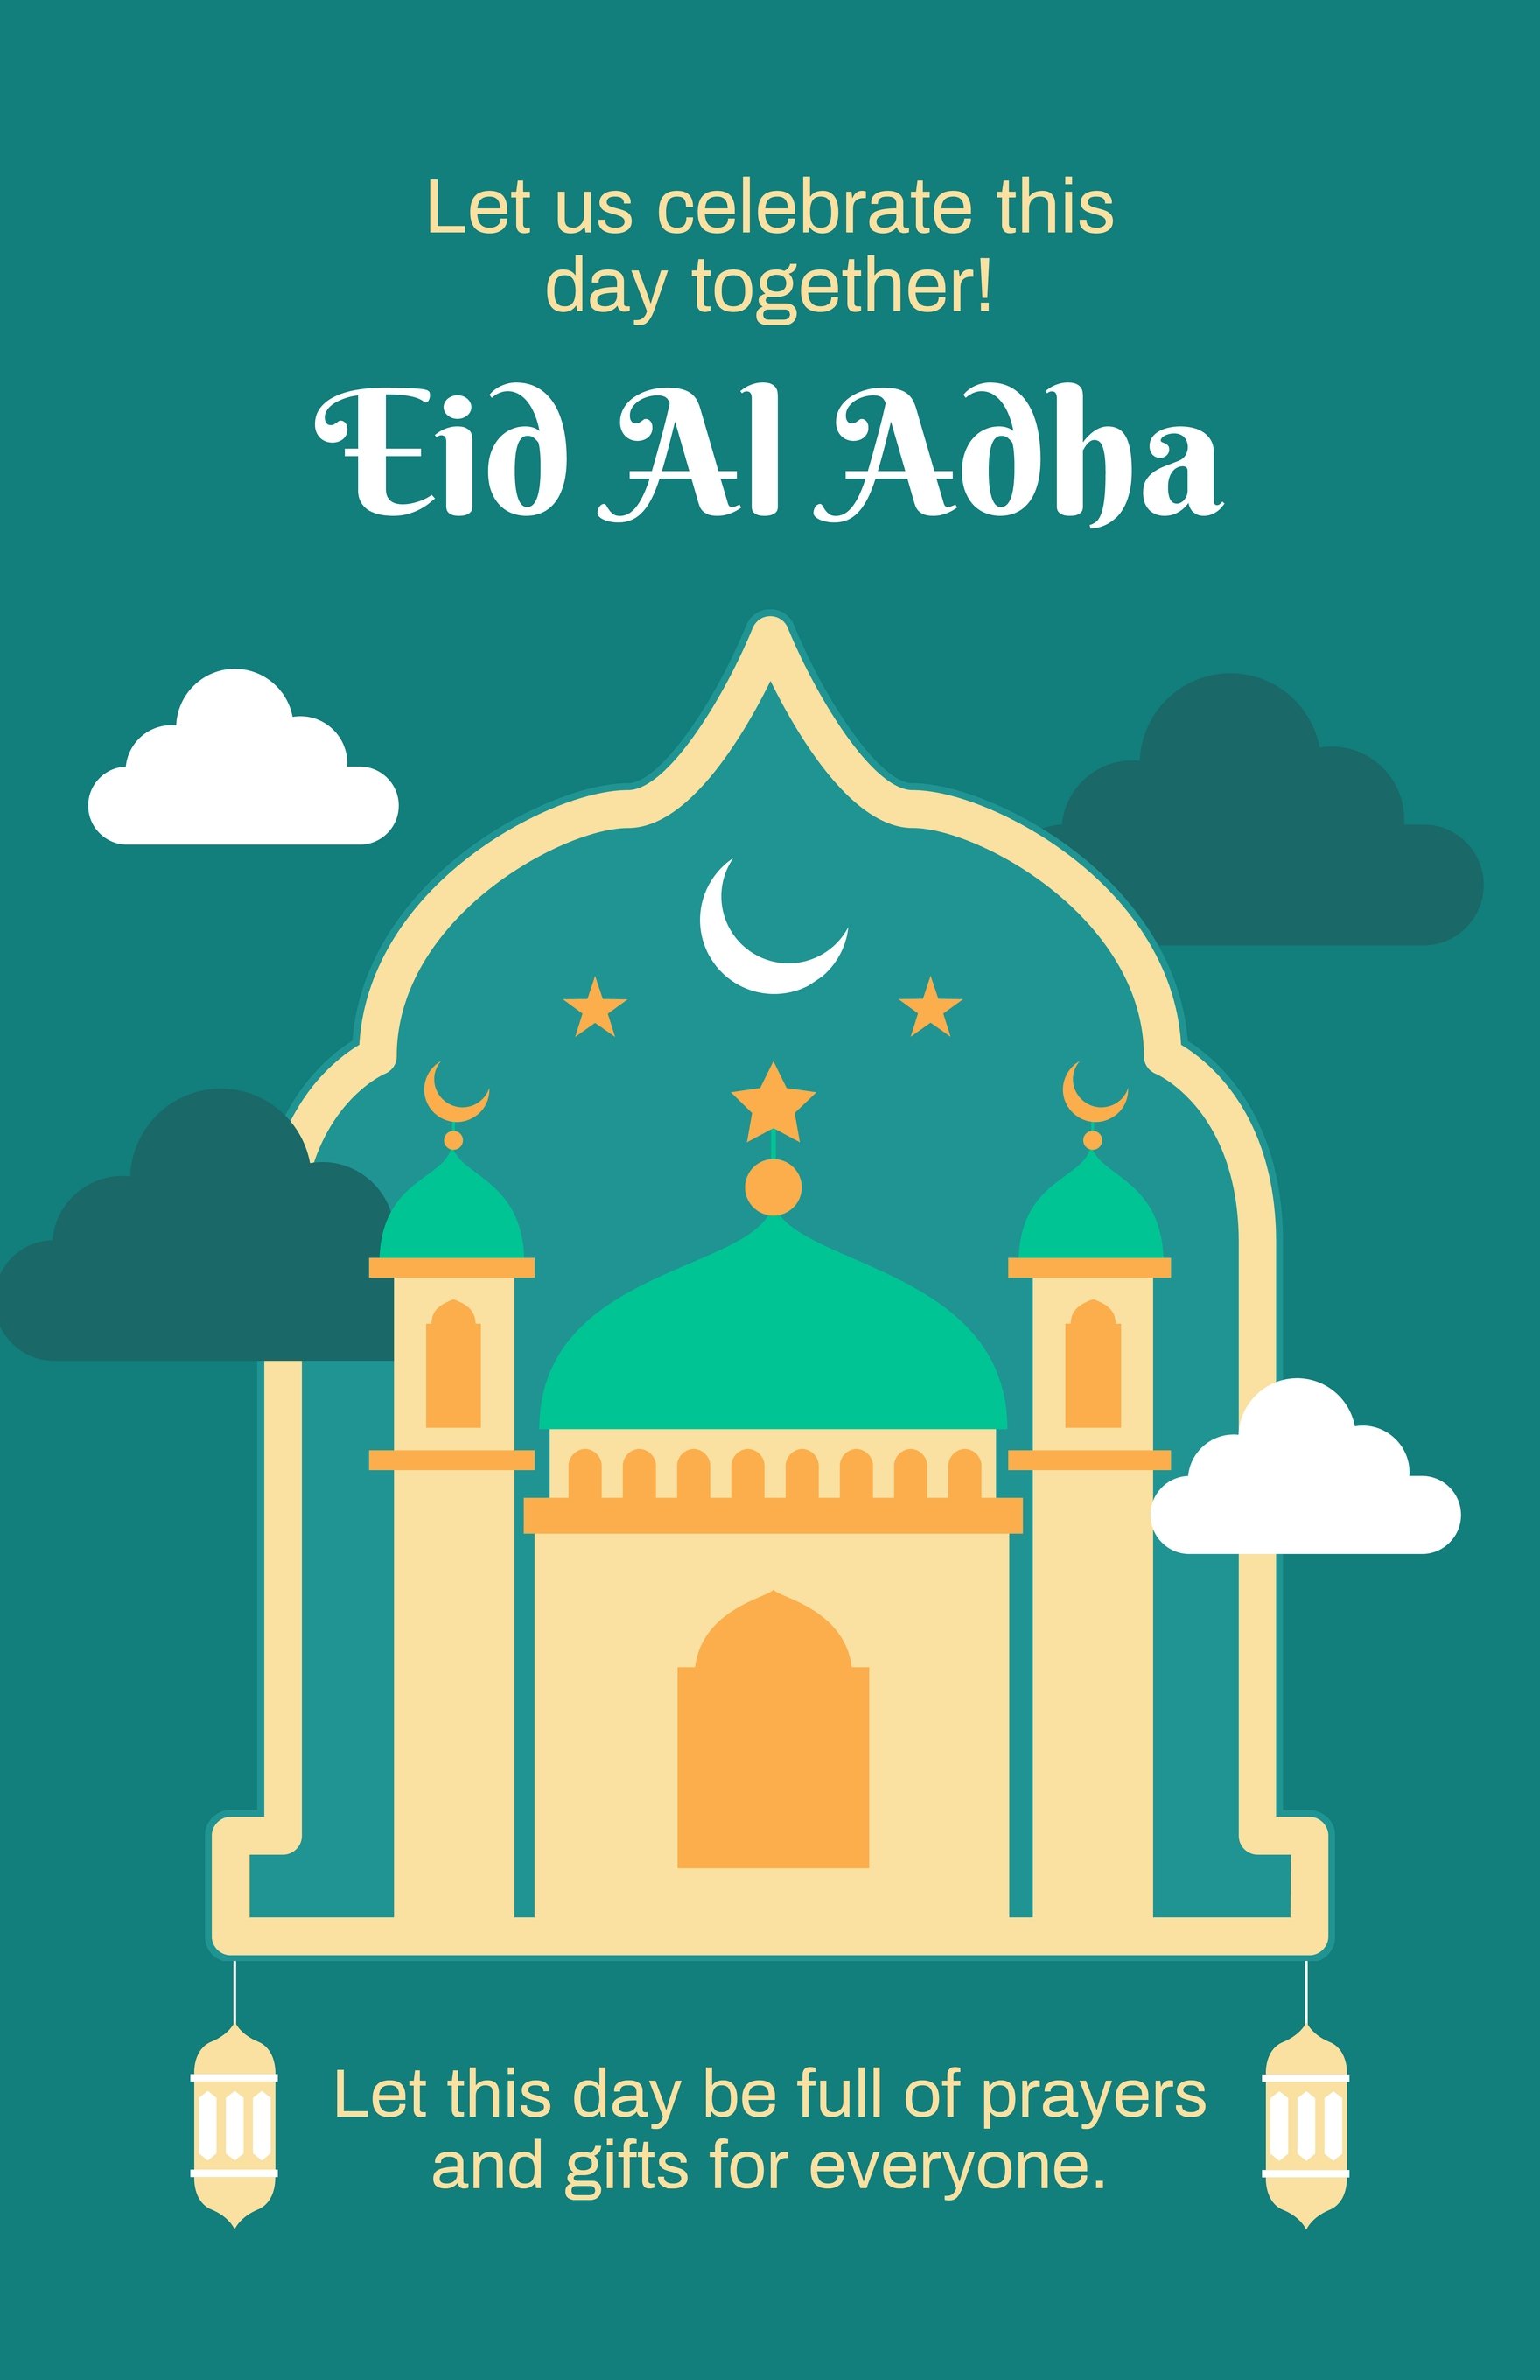 Free Green Eid Al Adha Poster in Word, Google Docs, Illustrator, PSD, Apple Pages, Publisher